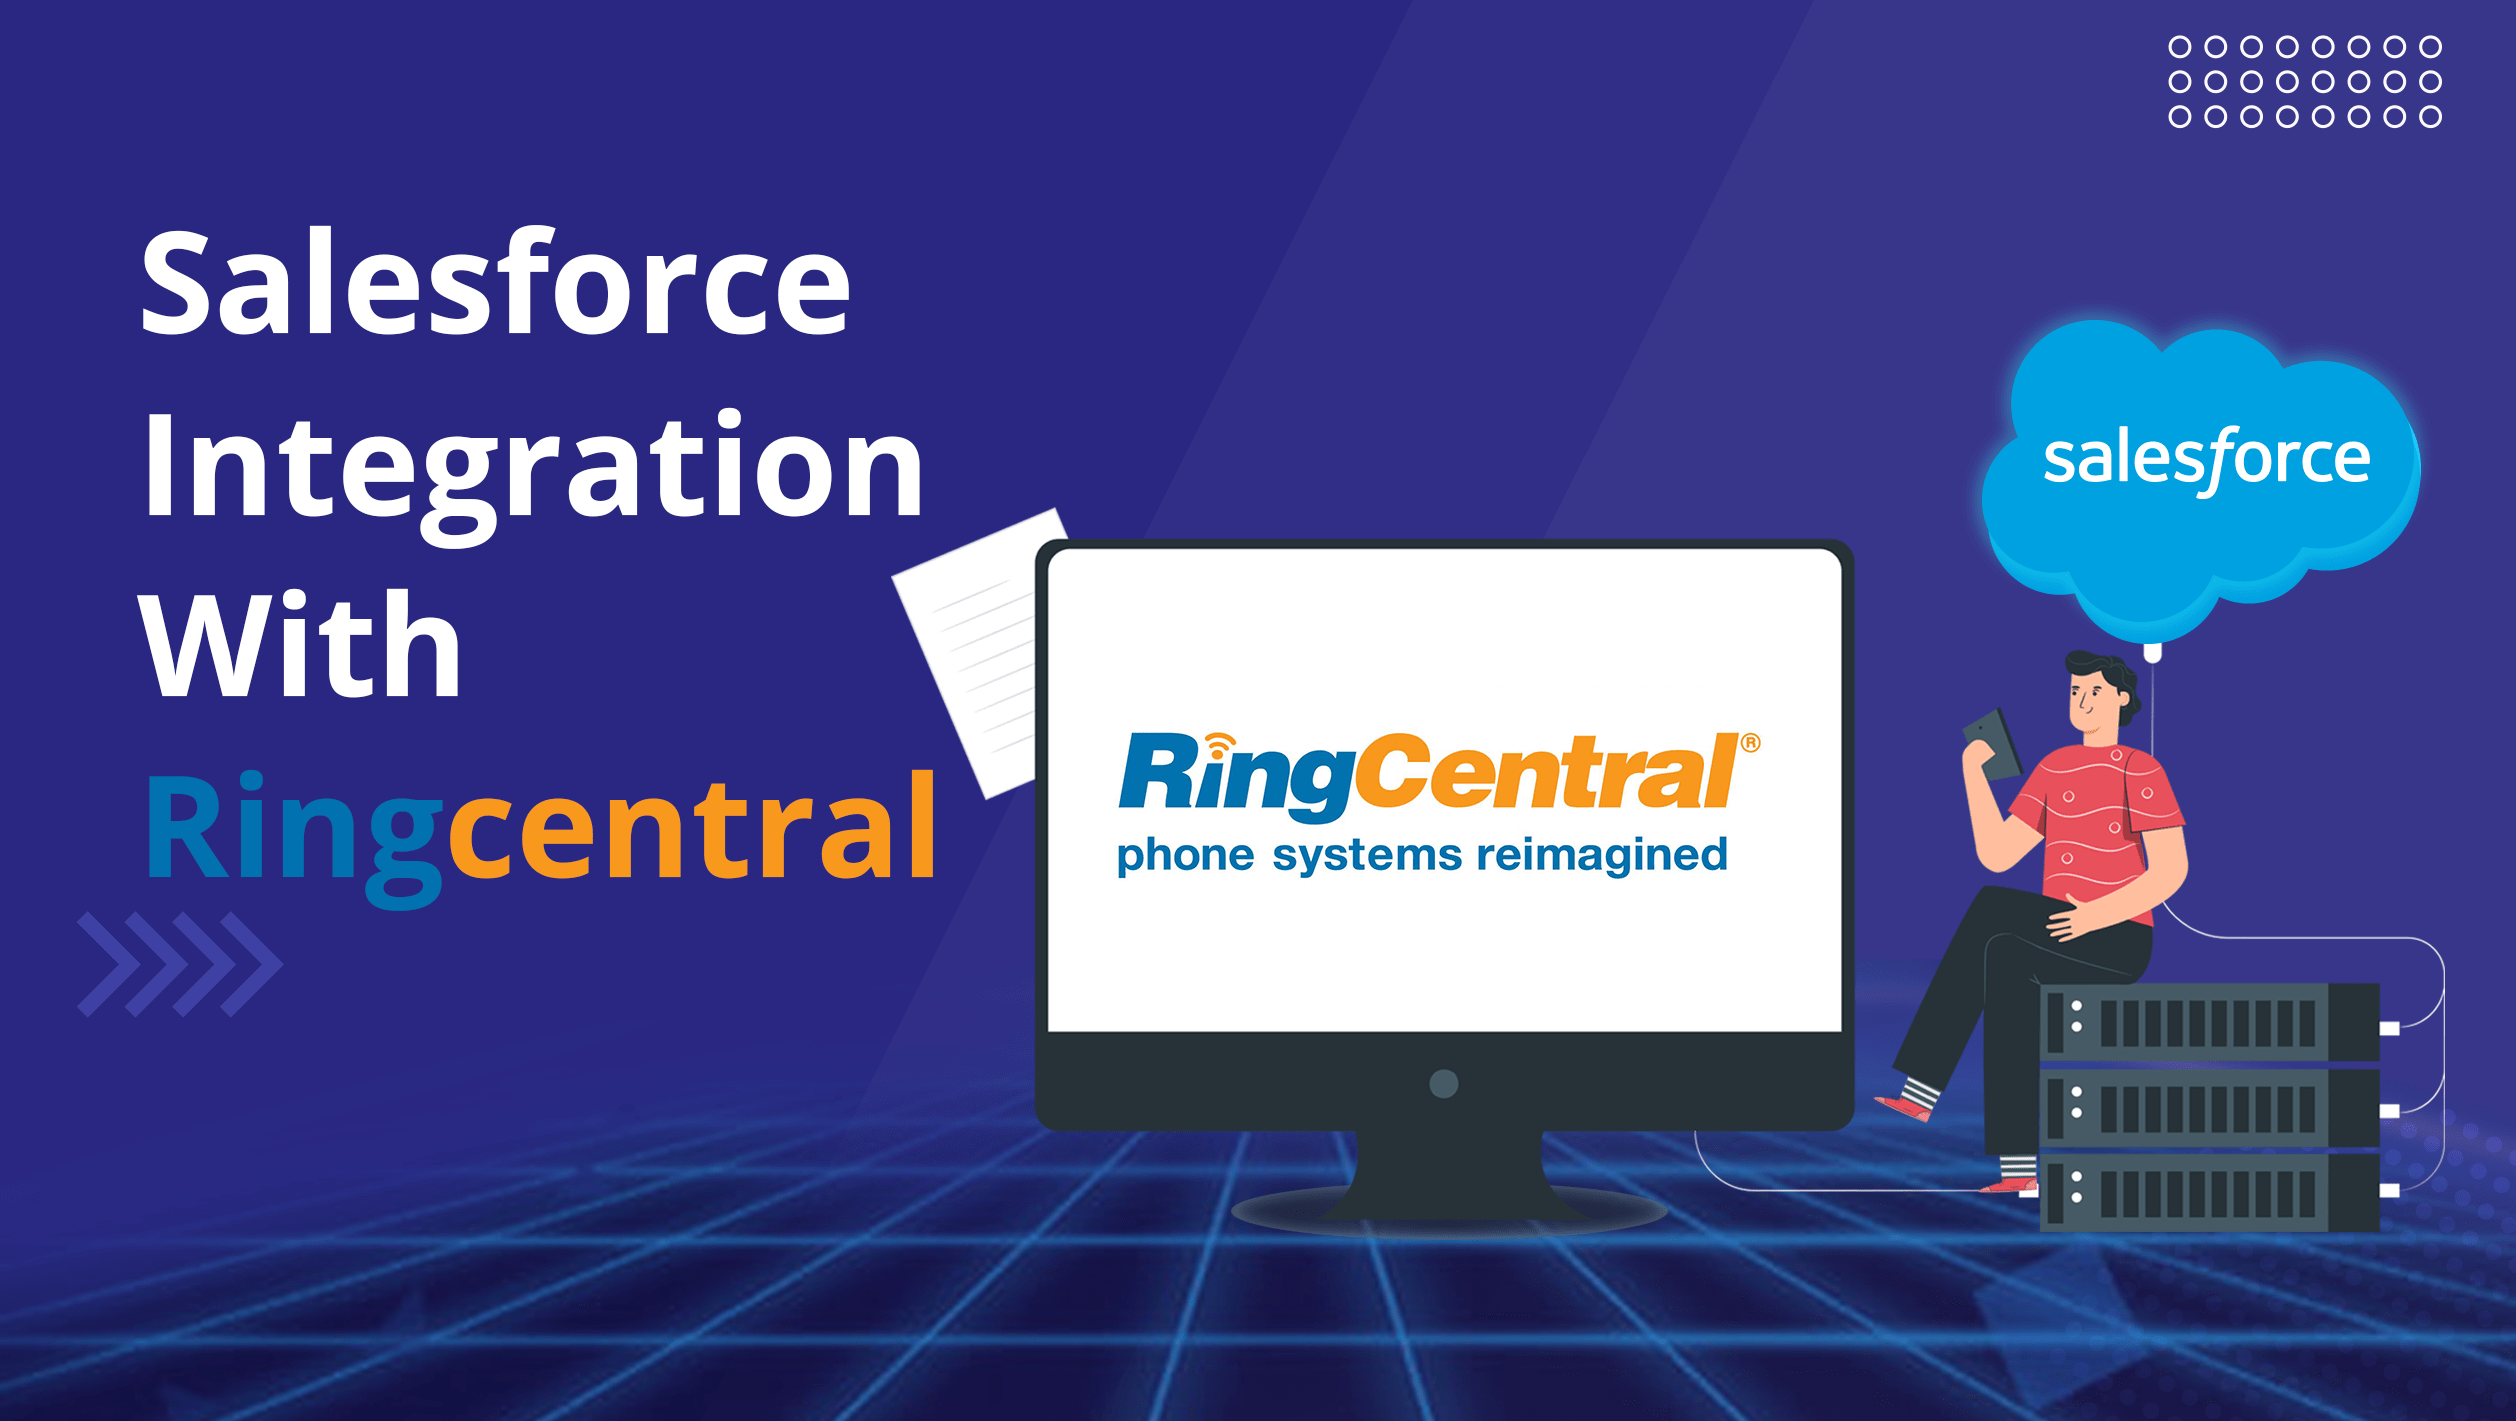 Salesforce Integration With RingCentral